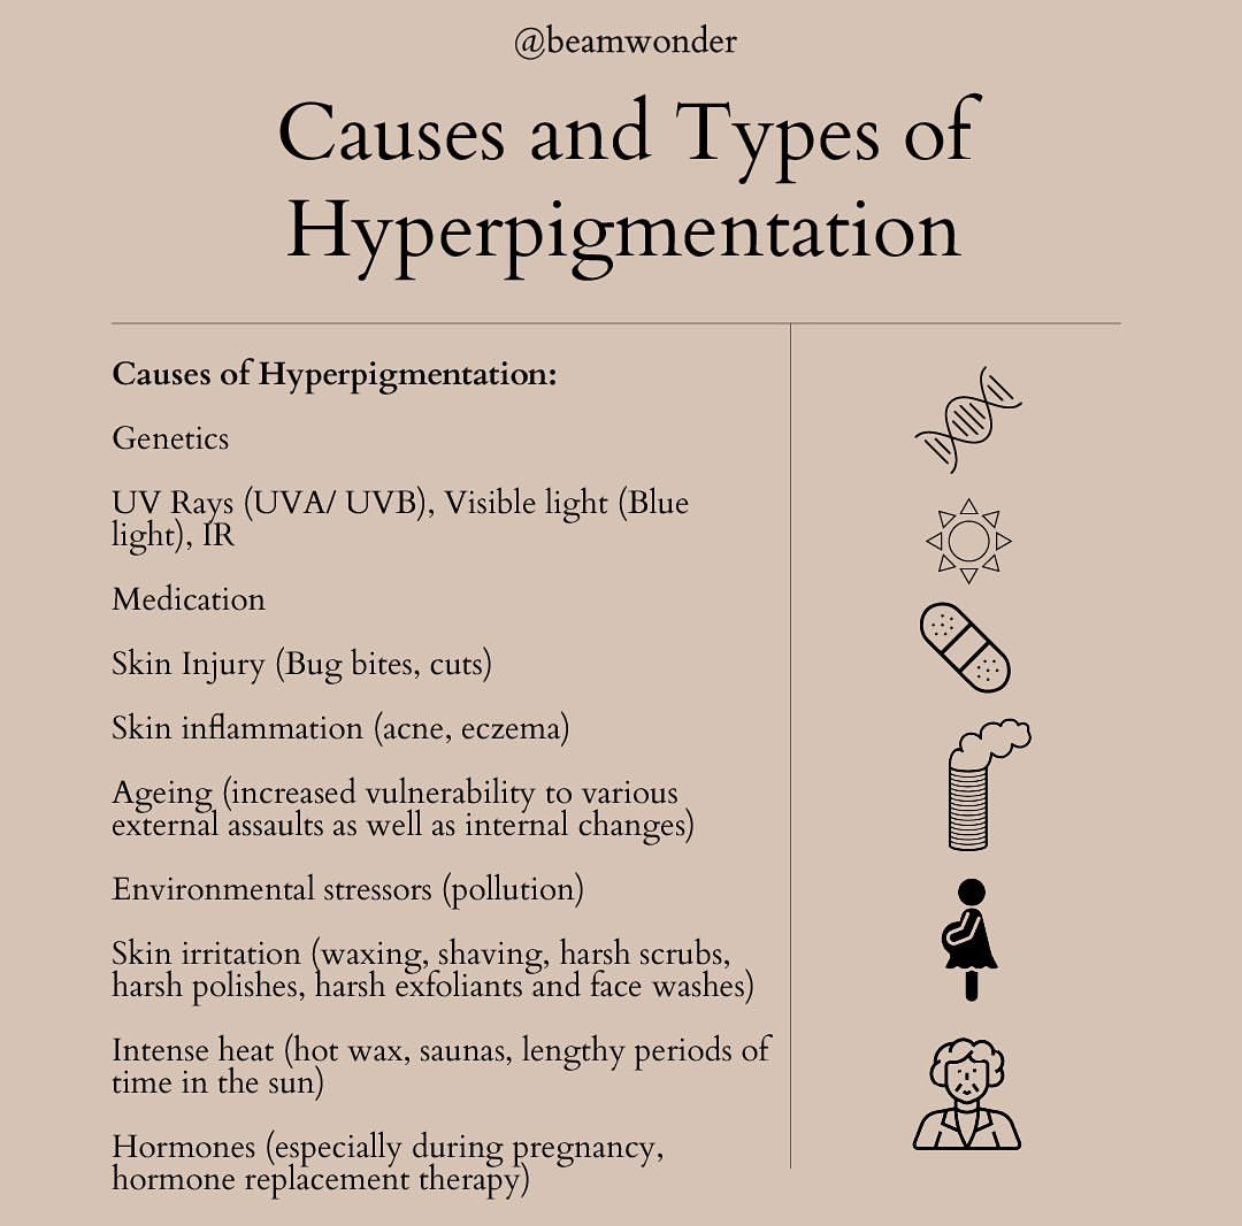 Causes and Types of Hyperpigmentation